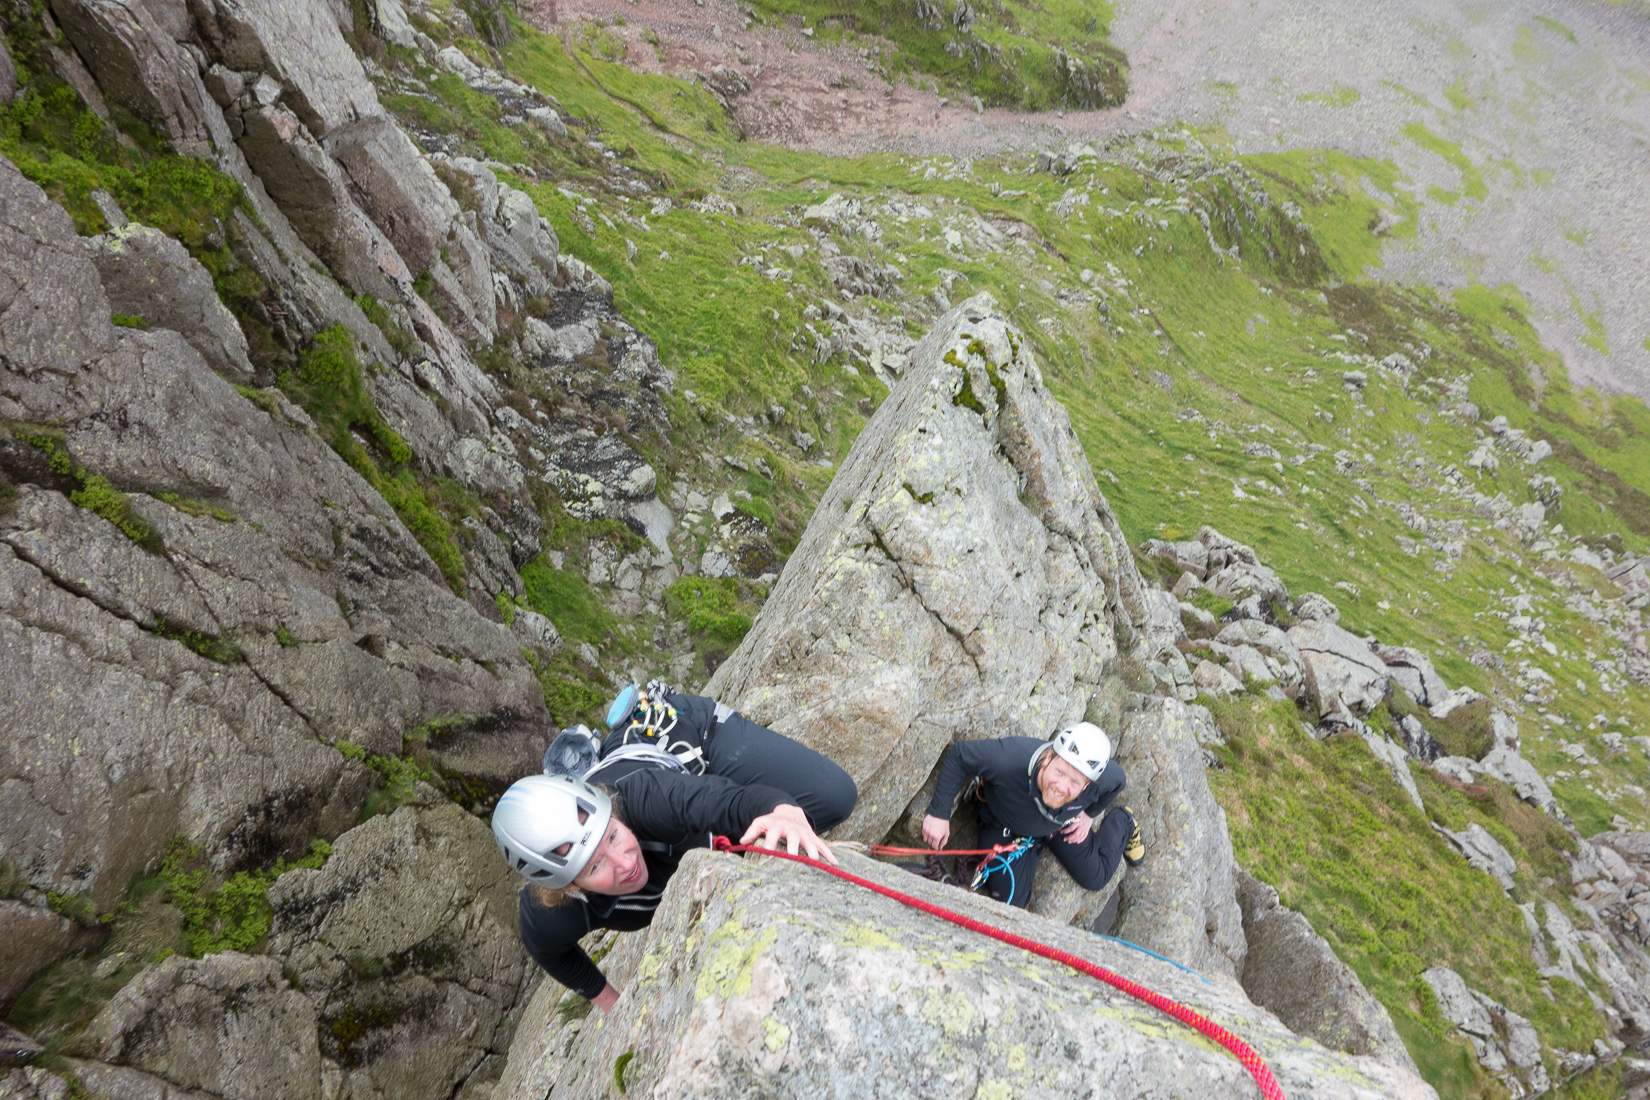 On the top pitch of Napes Needle